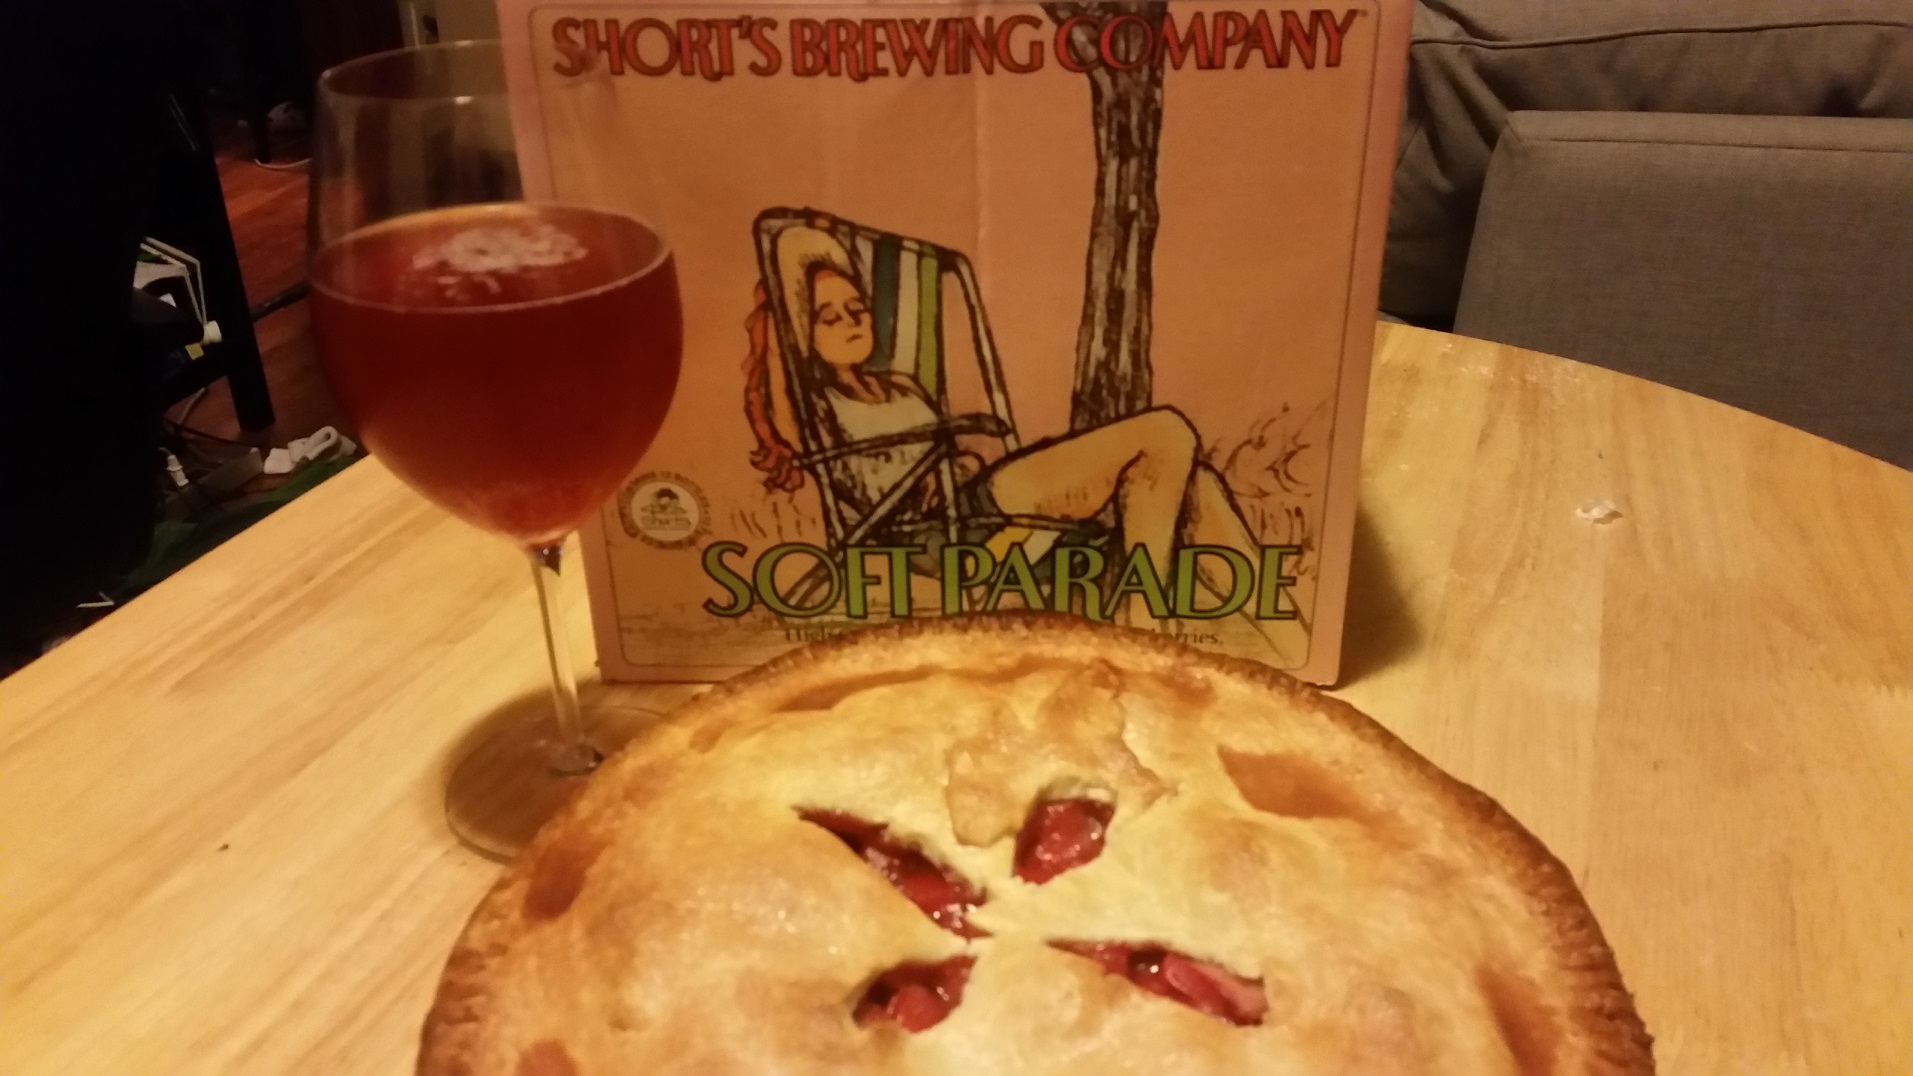 Strawberry Rhubarb Pie, filling looks just like Soft Parade